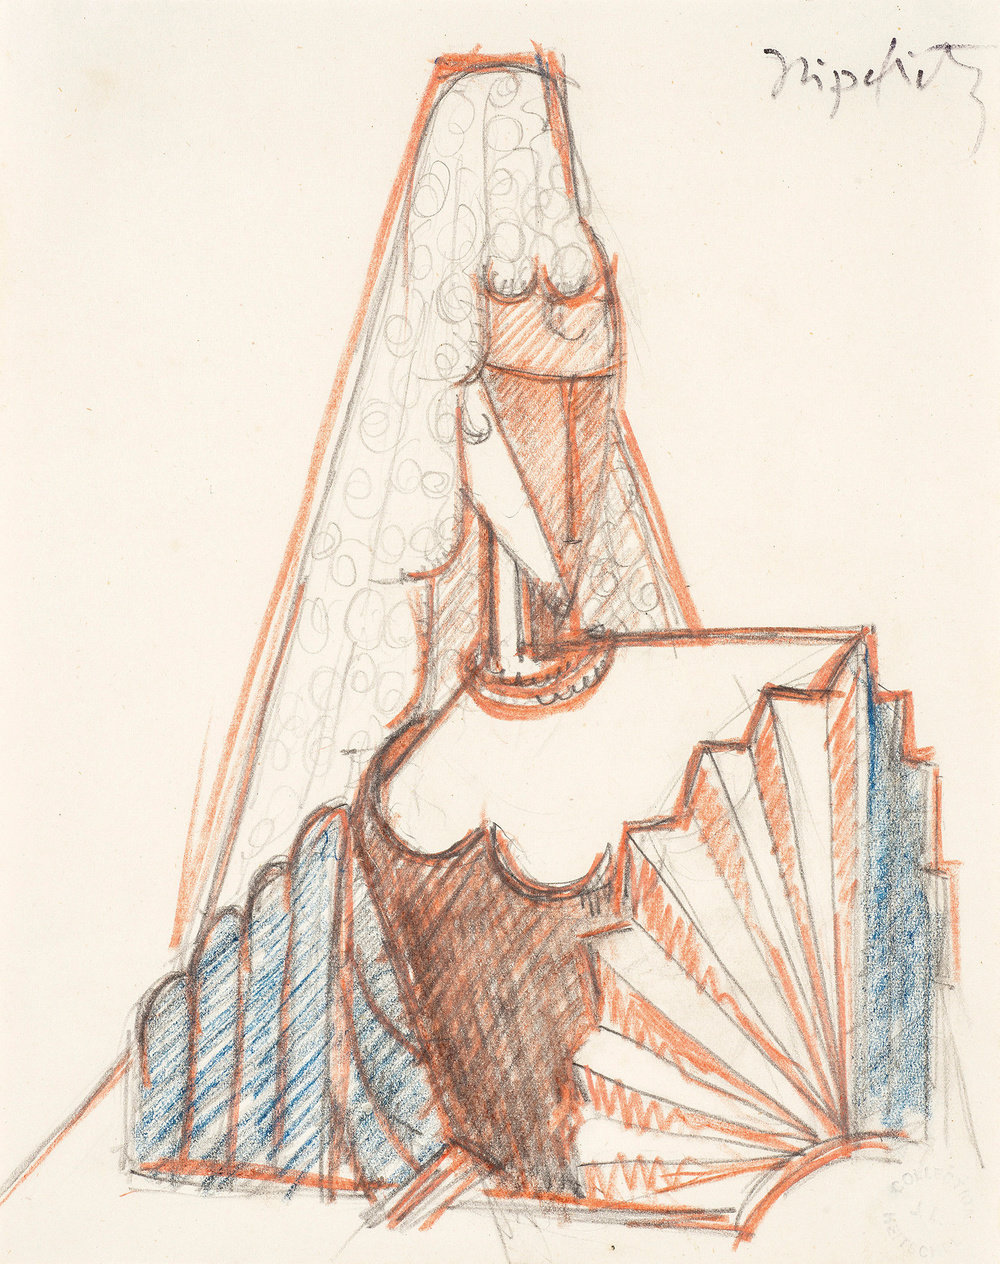 Spanish woman with fan, 1914, pencil and colored crayon on paper, 8 x 6 1 4 in, nos 46 995